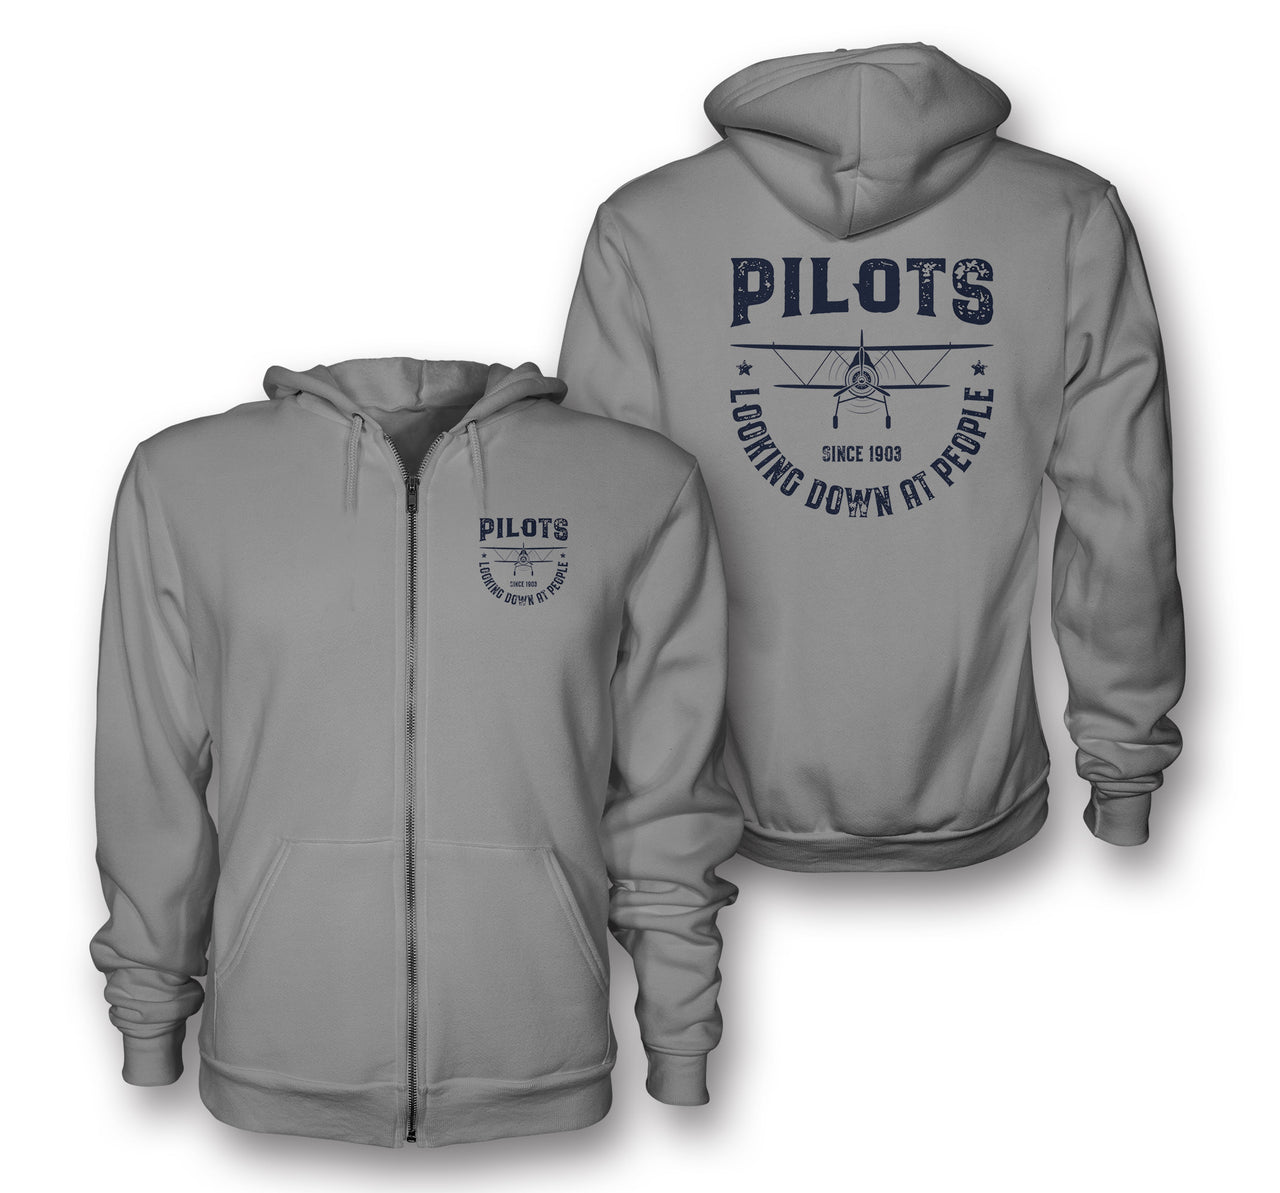 Pilots Looking Down at People Since 1903 Designed Zipped Hoodies